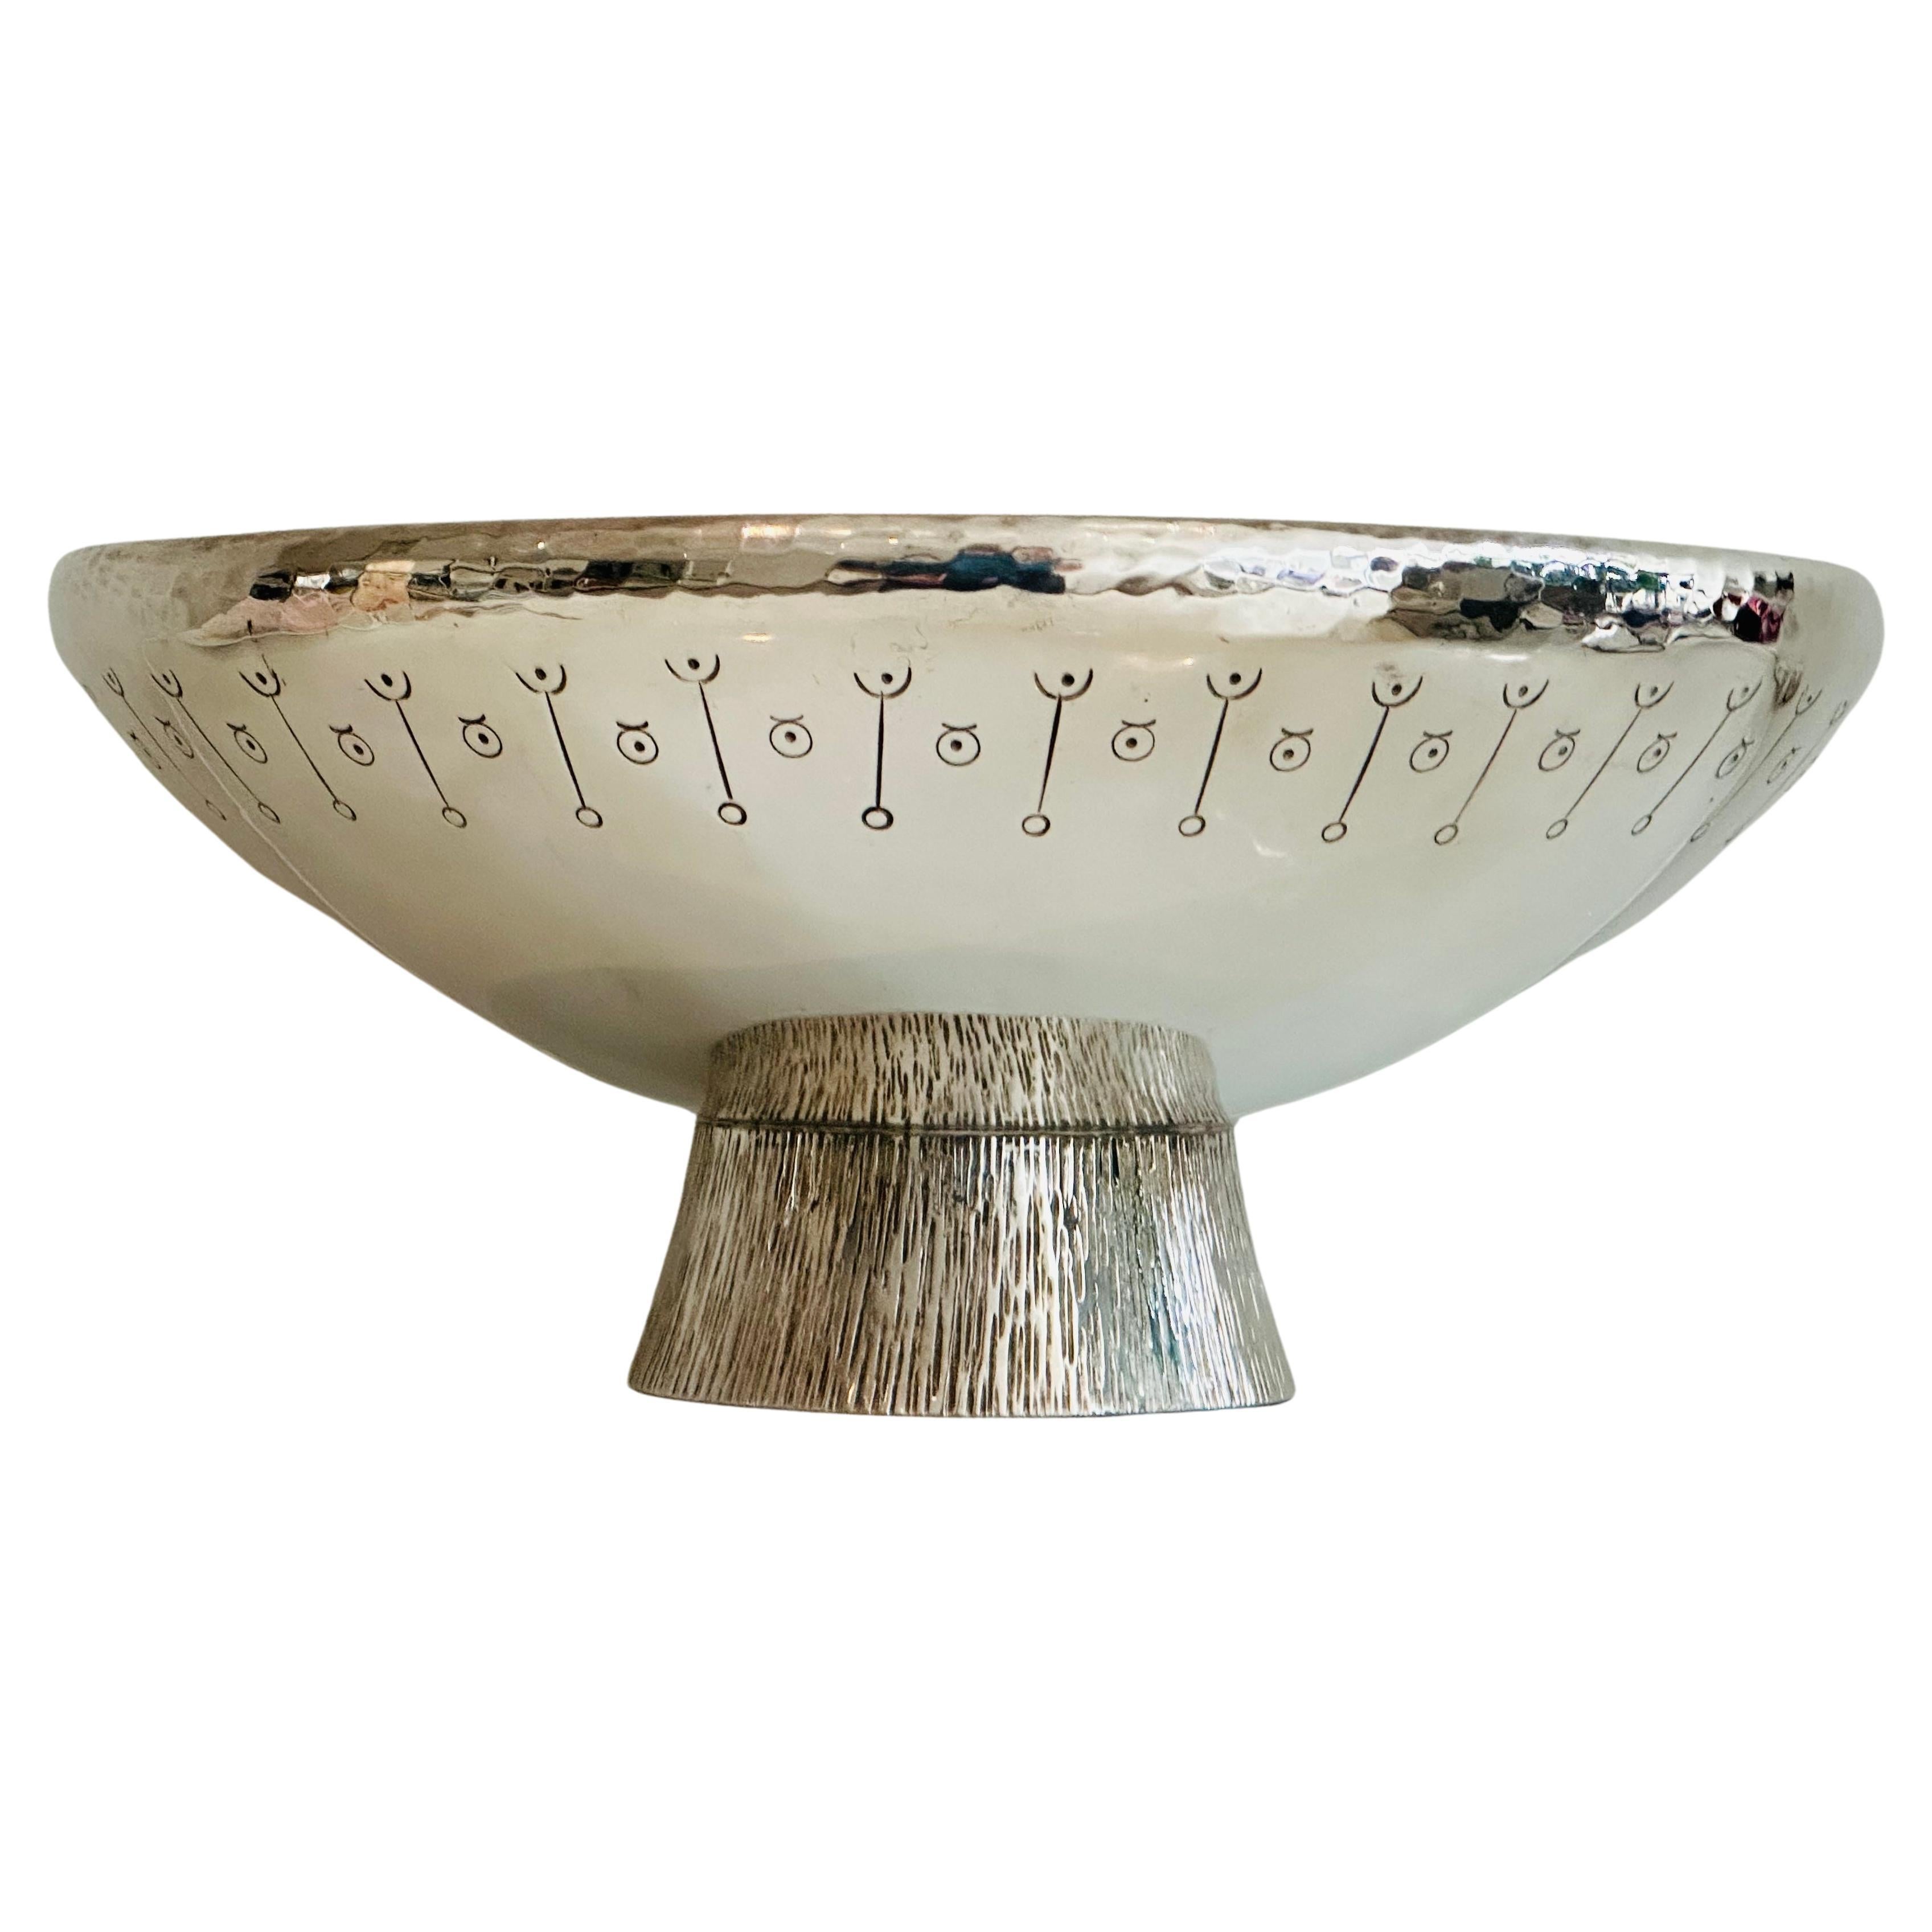 1980s English Silver Plated Decorative Hand-Hammered Serving or Display Bowl For Sale